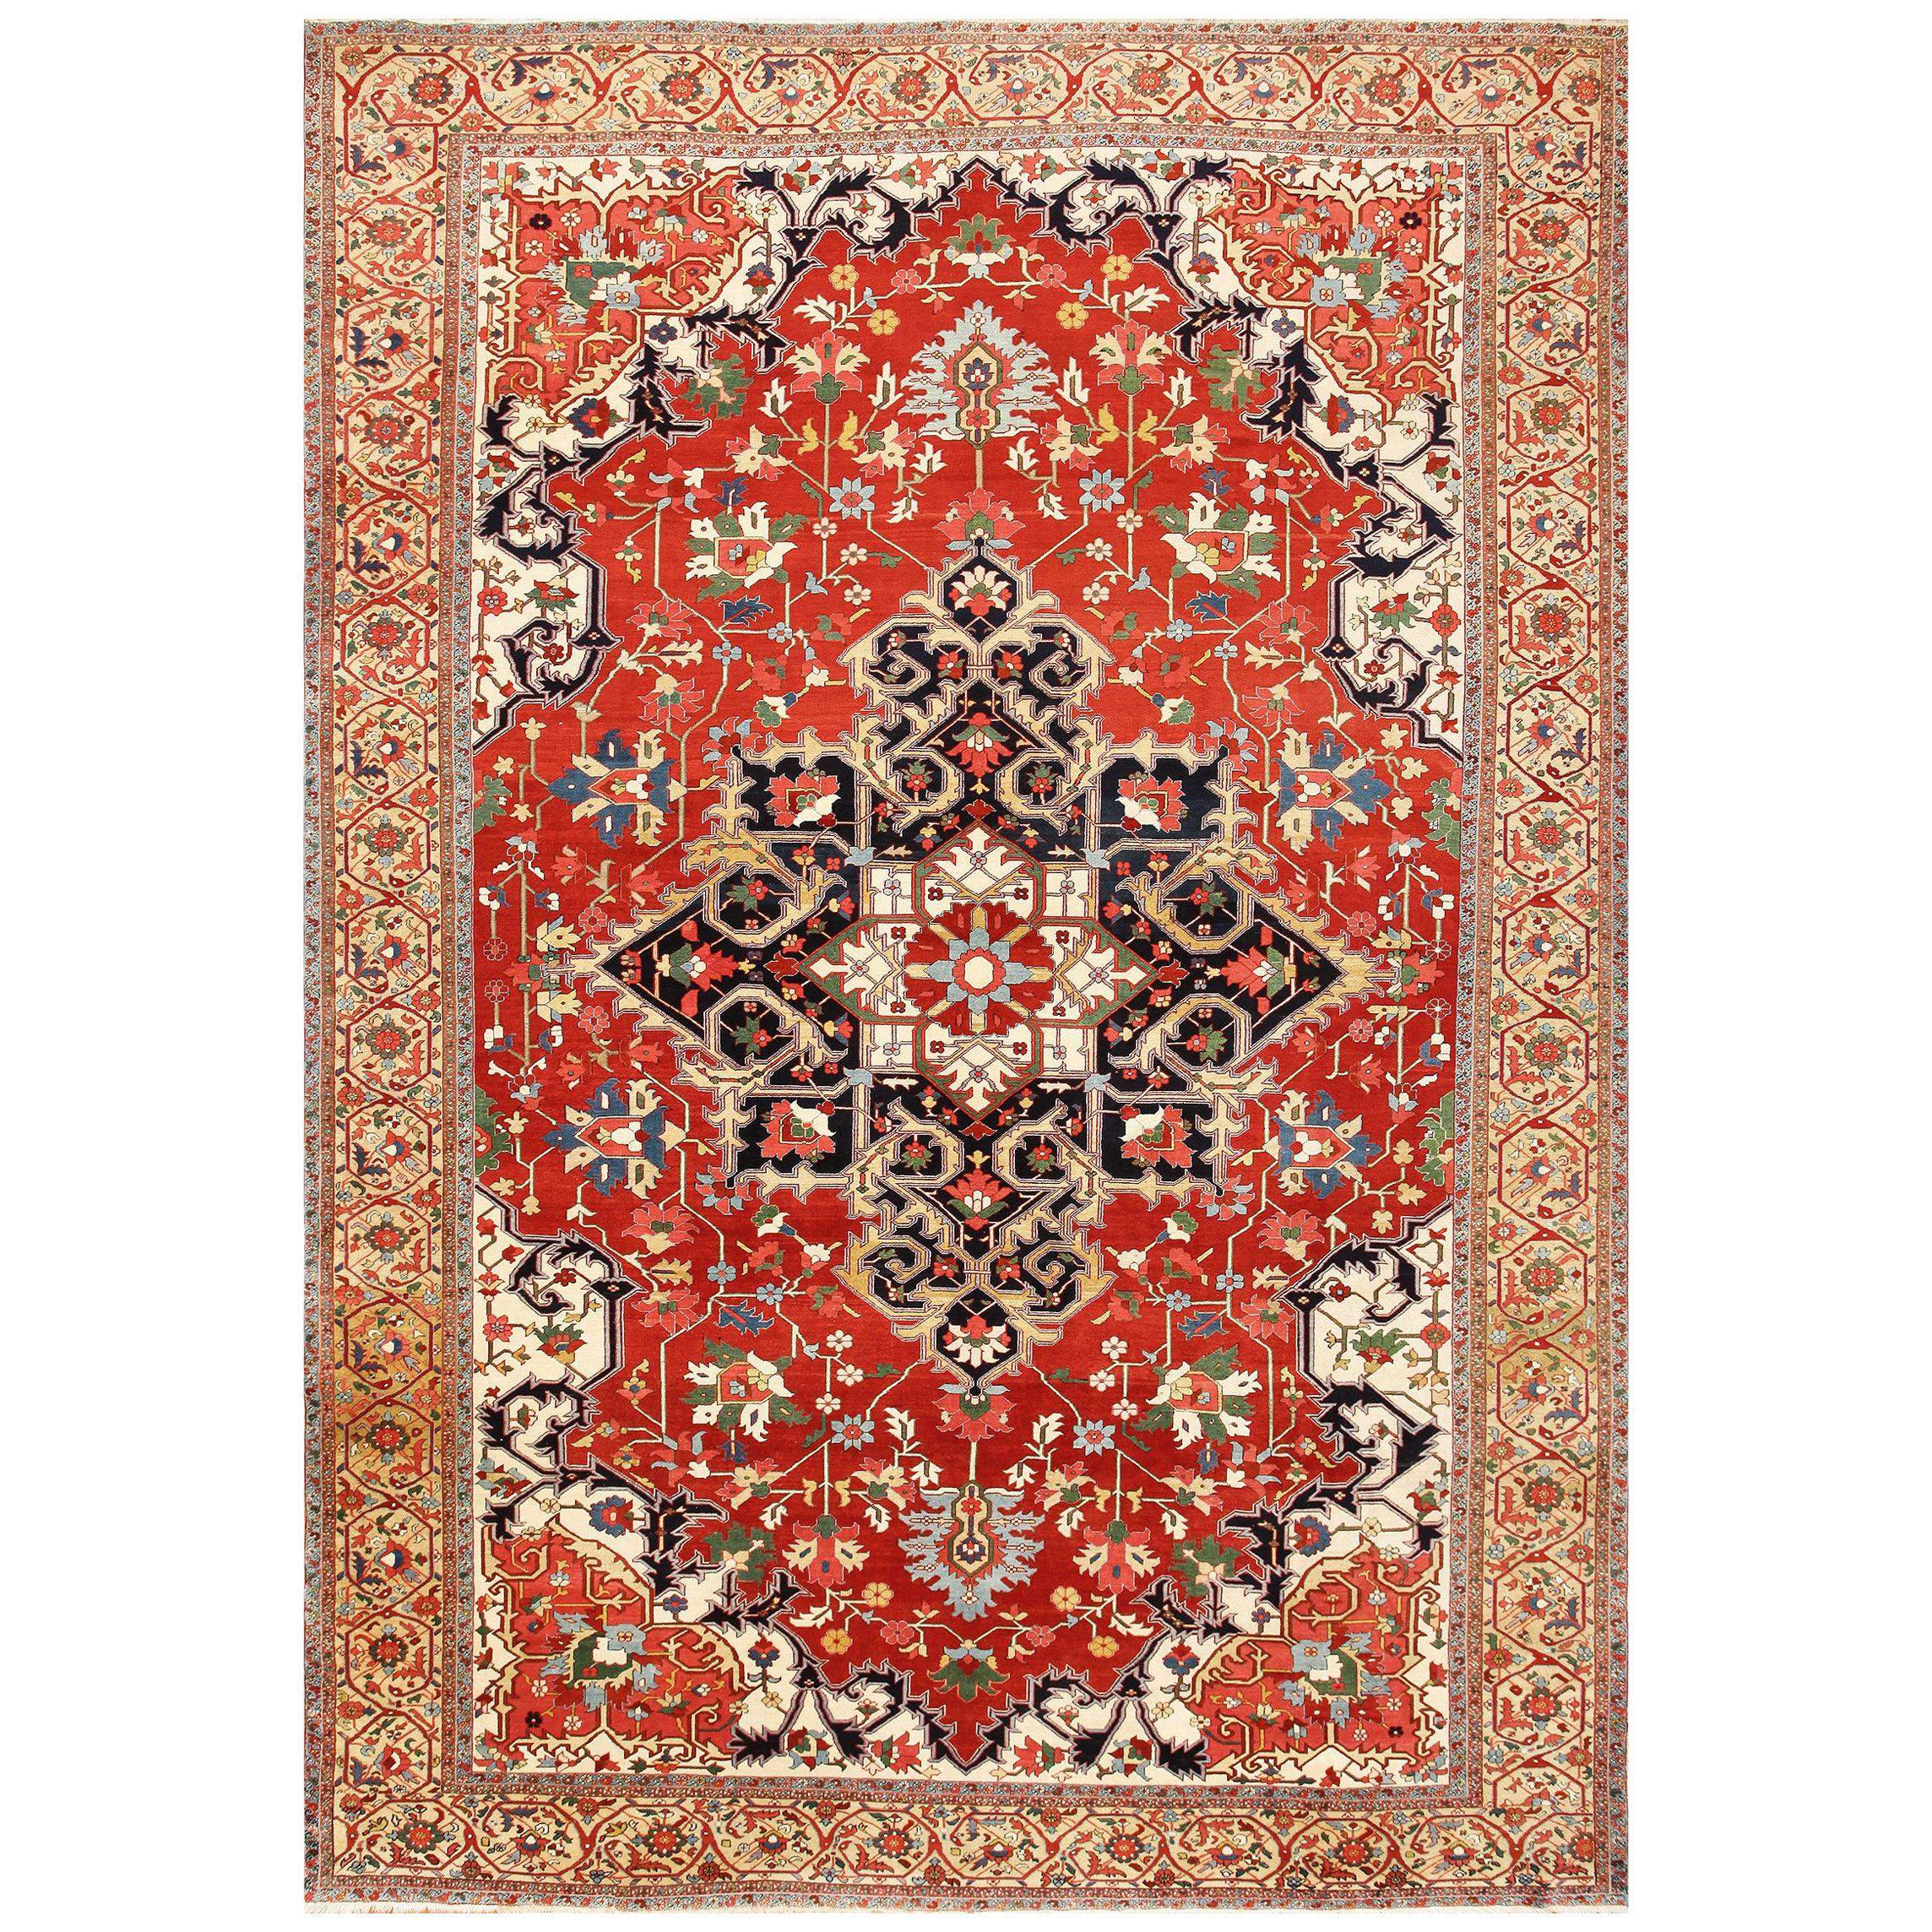 Nazmiyal Collection Antique Persian Serapi Rug. Size: 12 ft. 3 in x 17 ft. 9 in